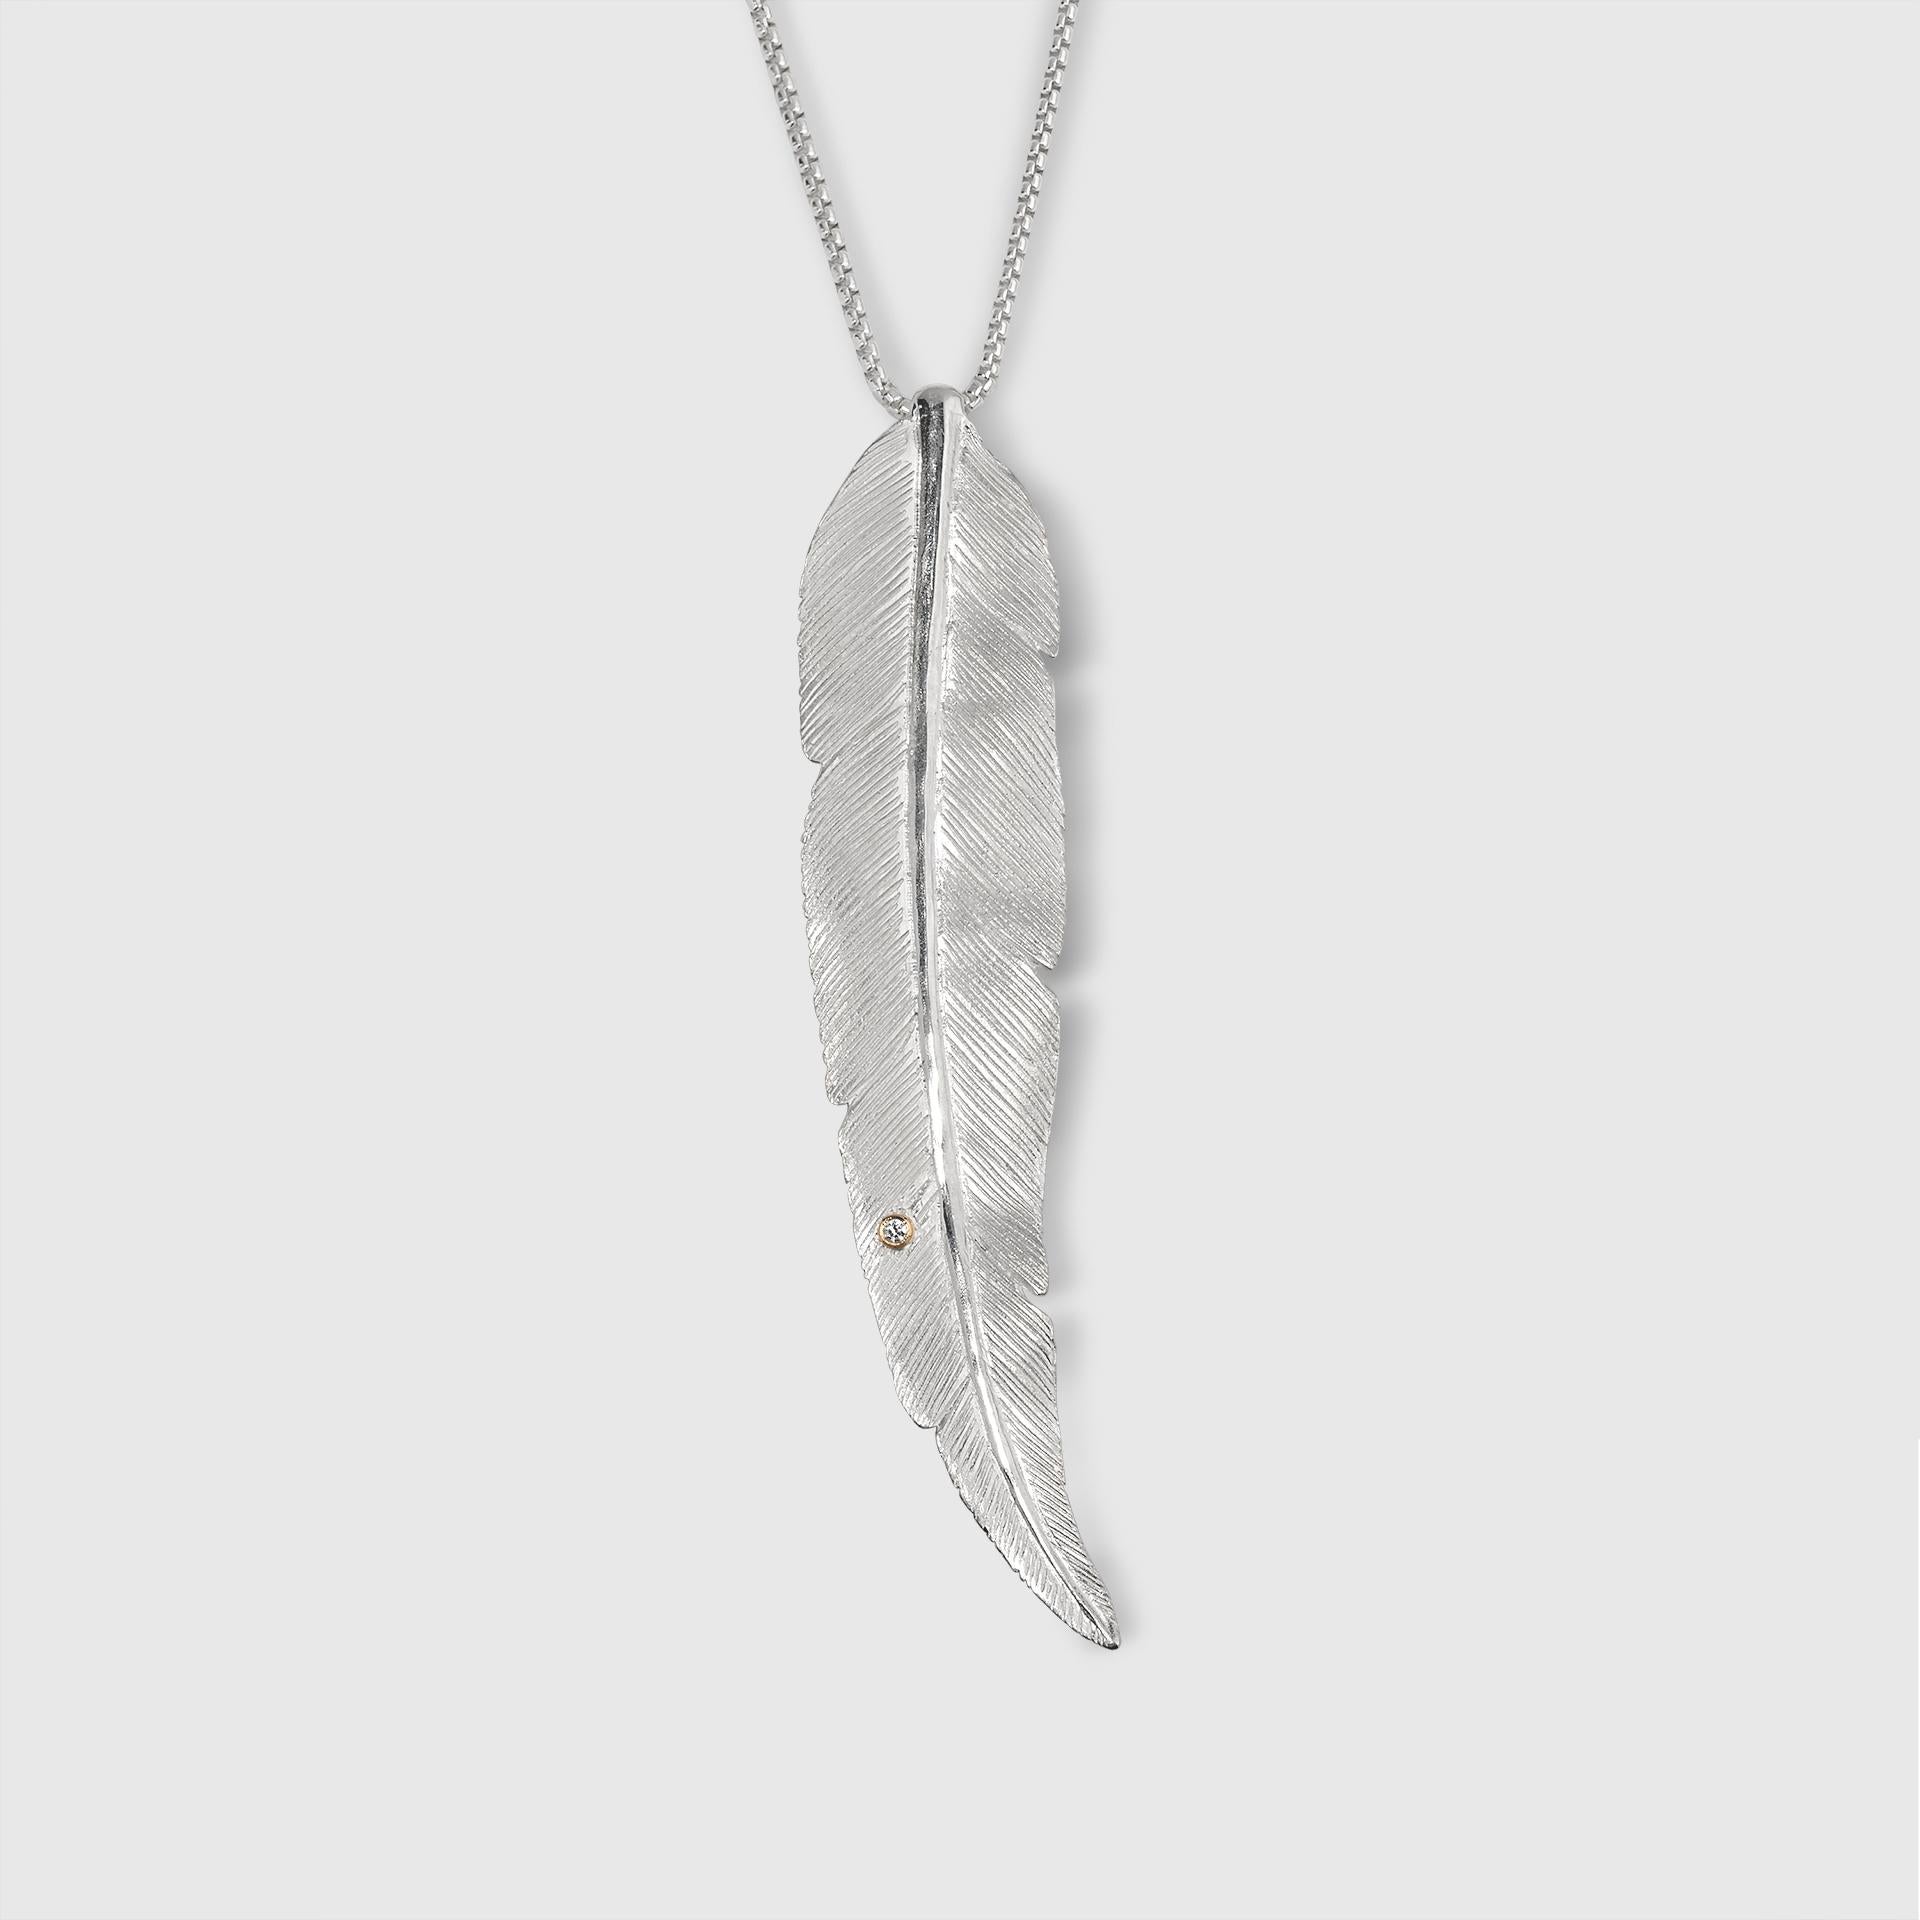 Large Sterling Silver Detailed Feather Pendant with Diamond Detail by Ashley Childs

This feather was originally carved by 